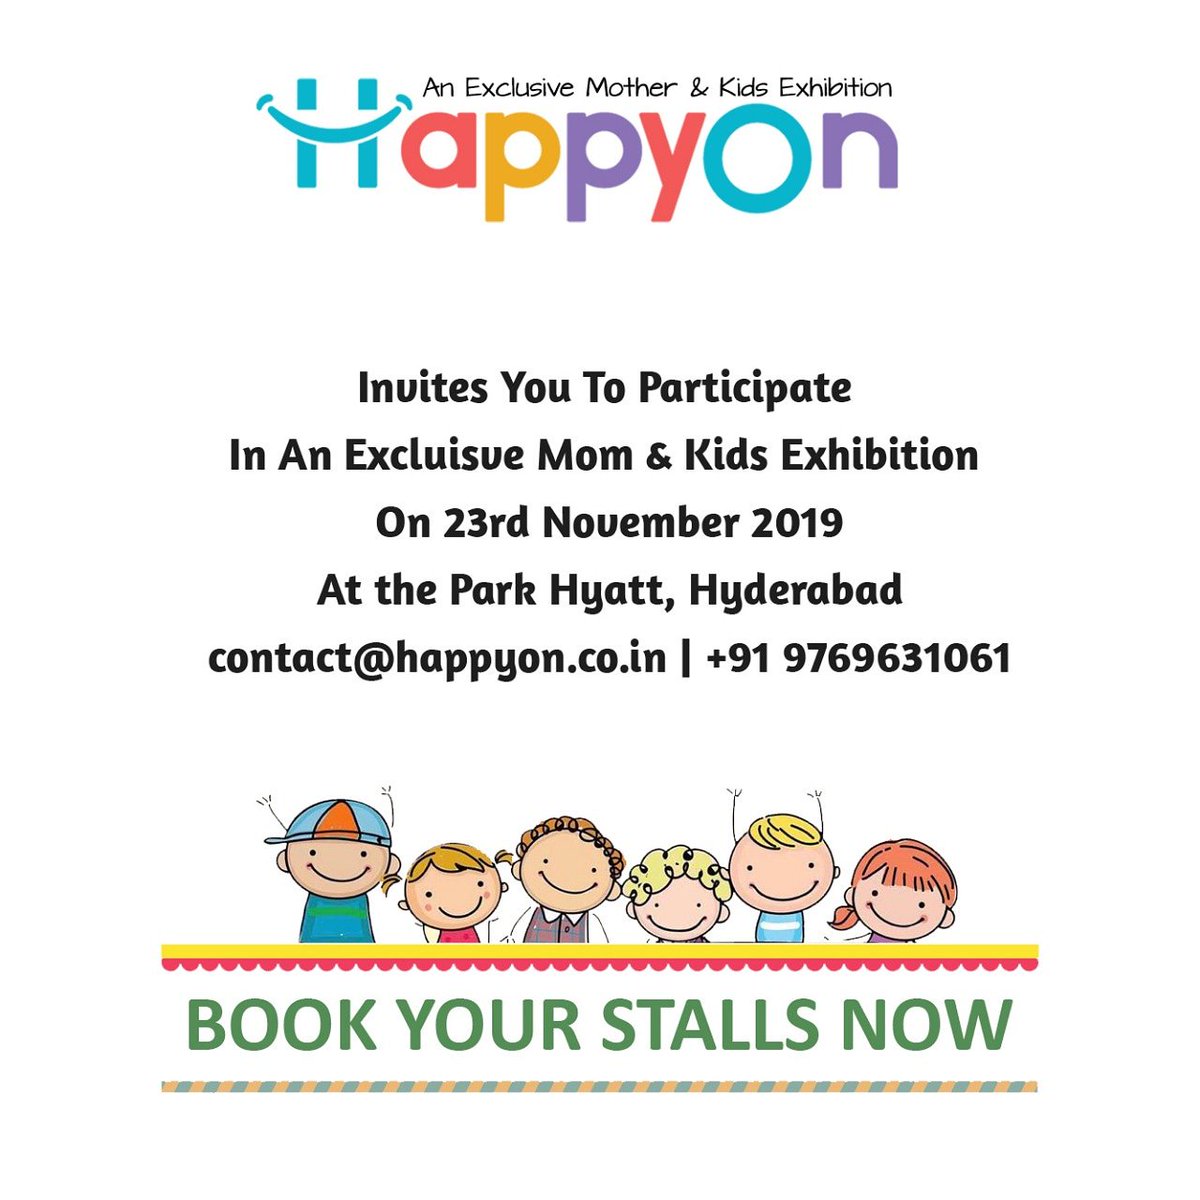 Woohoo! Hyderabad Mommies we are coming to your city. Save the date. 
#hyderabad #kidsexhibition #exhibition #motherandkidsexhibition #toddlersexhibition #momblogger #parkhyatthyderabad